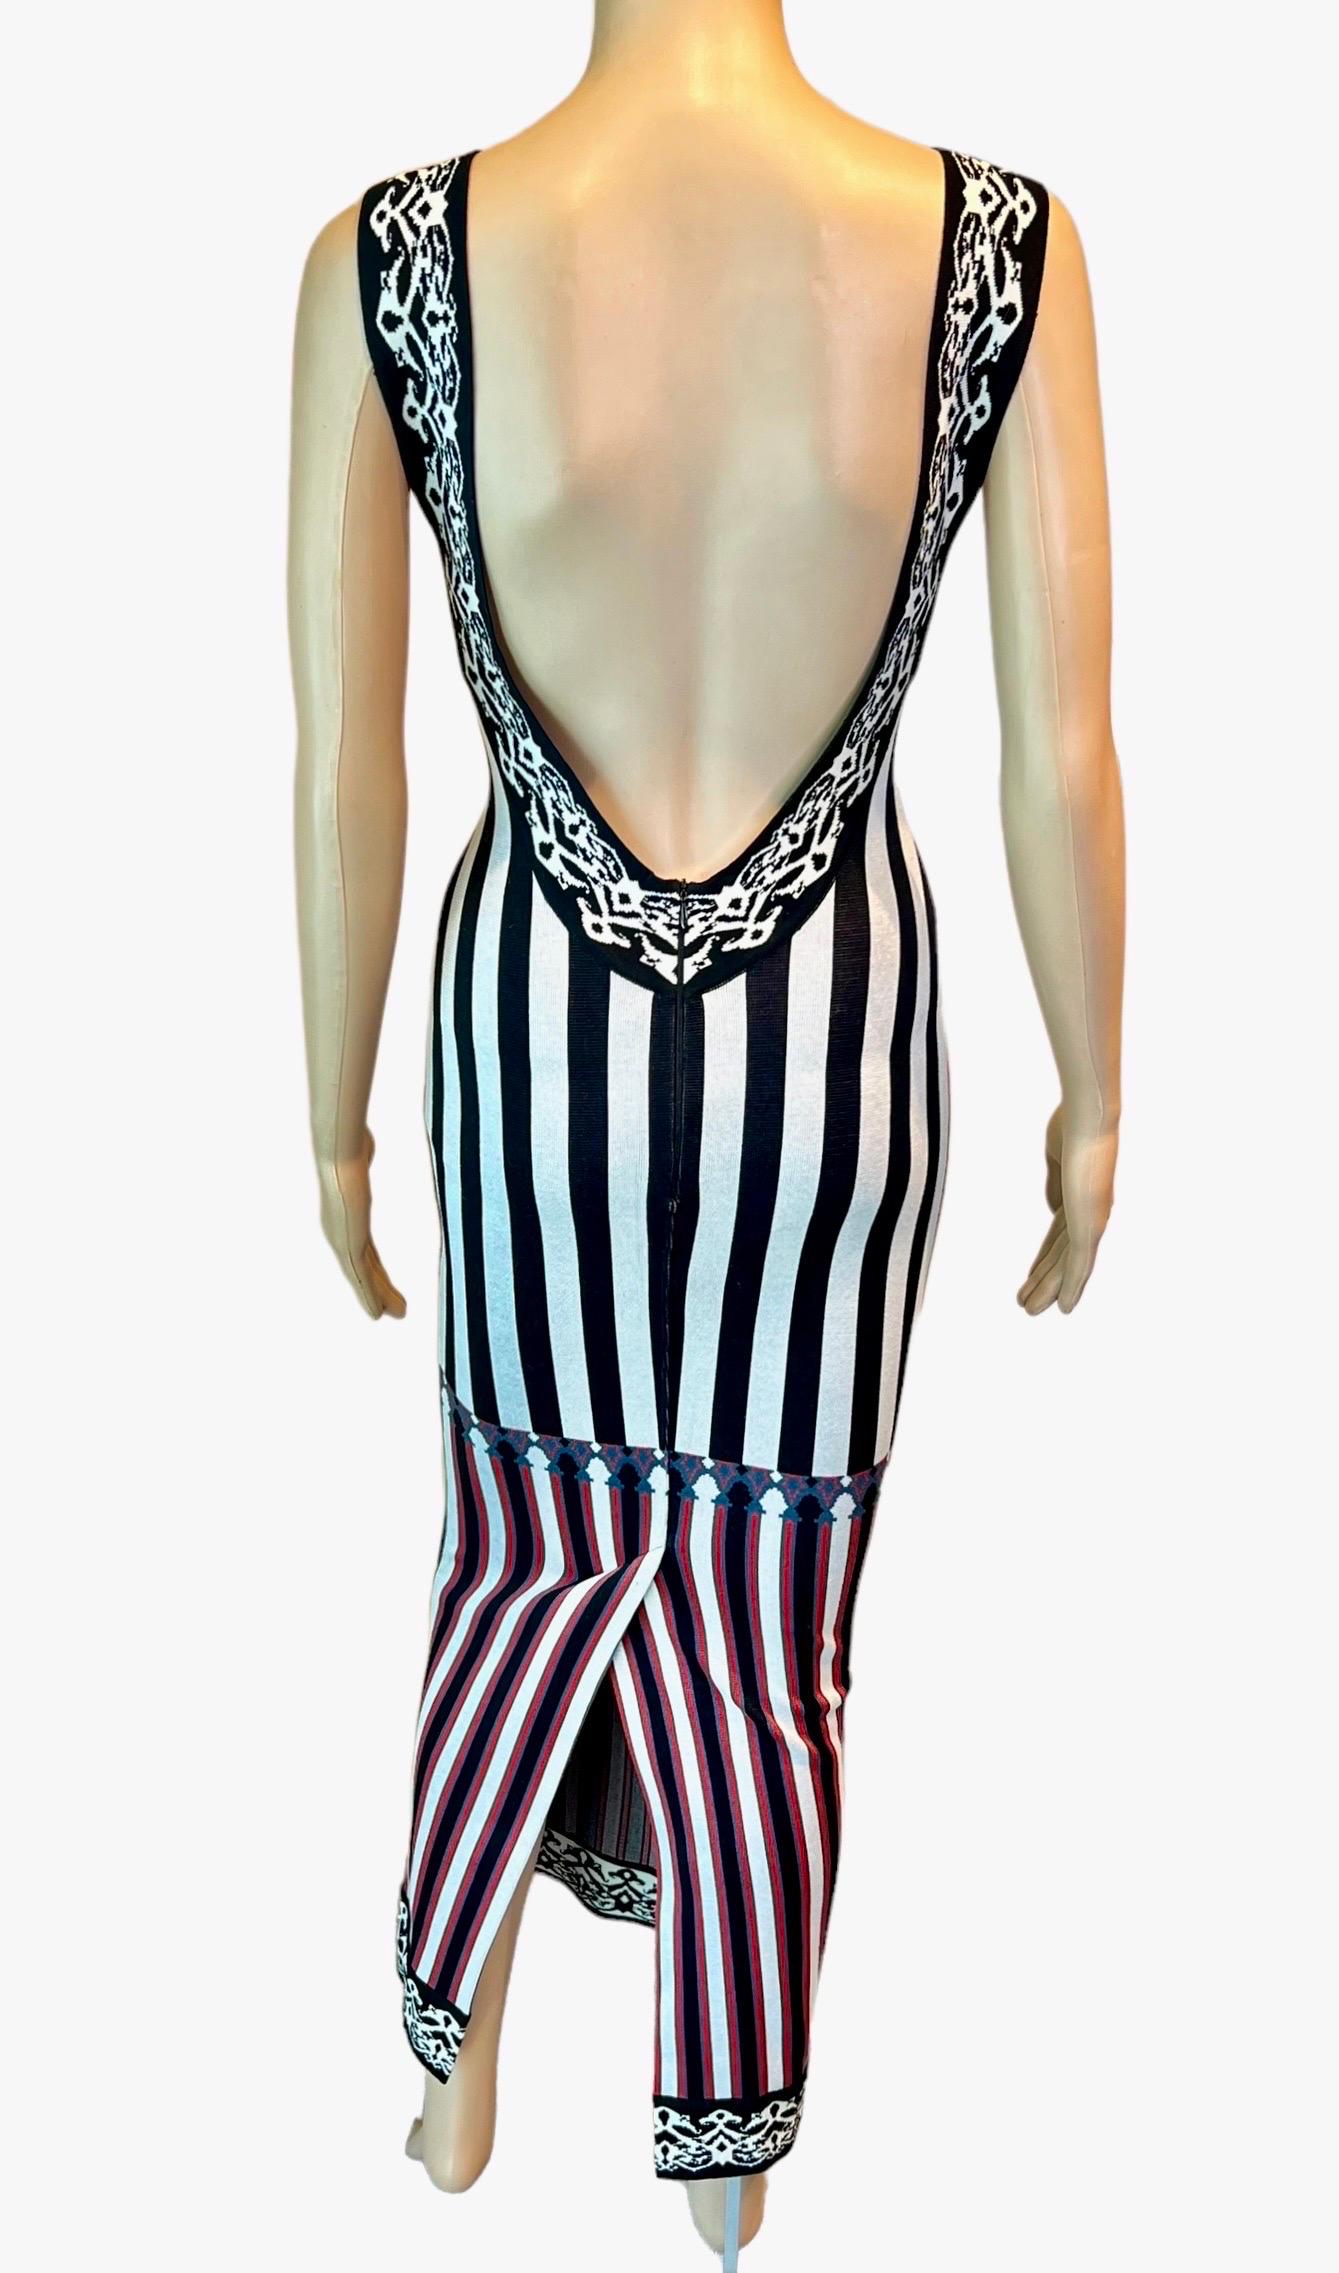 Azzedine Alaia S/S 1992 Runway Vintage Striped Bodycon Backless Maxi Dress In Good Condition For Sale In Naples, FL